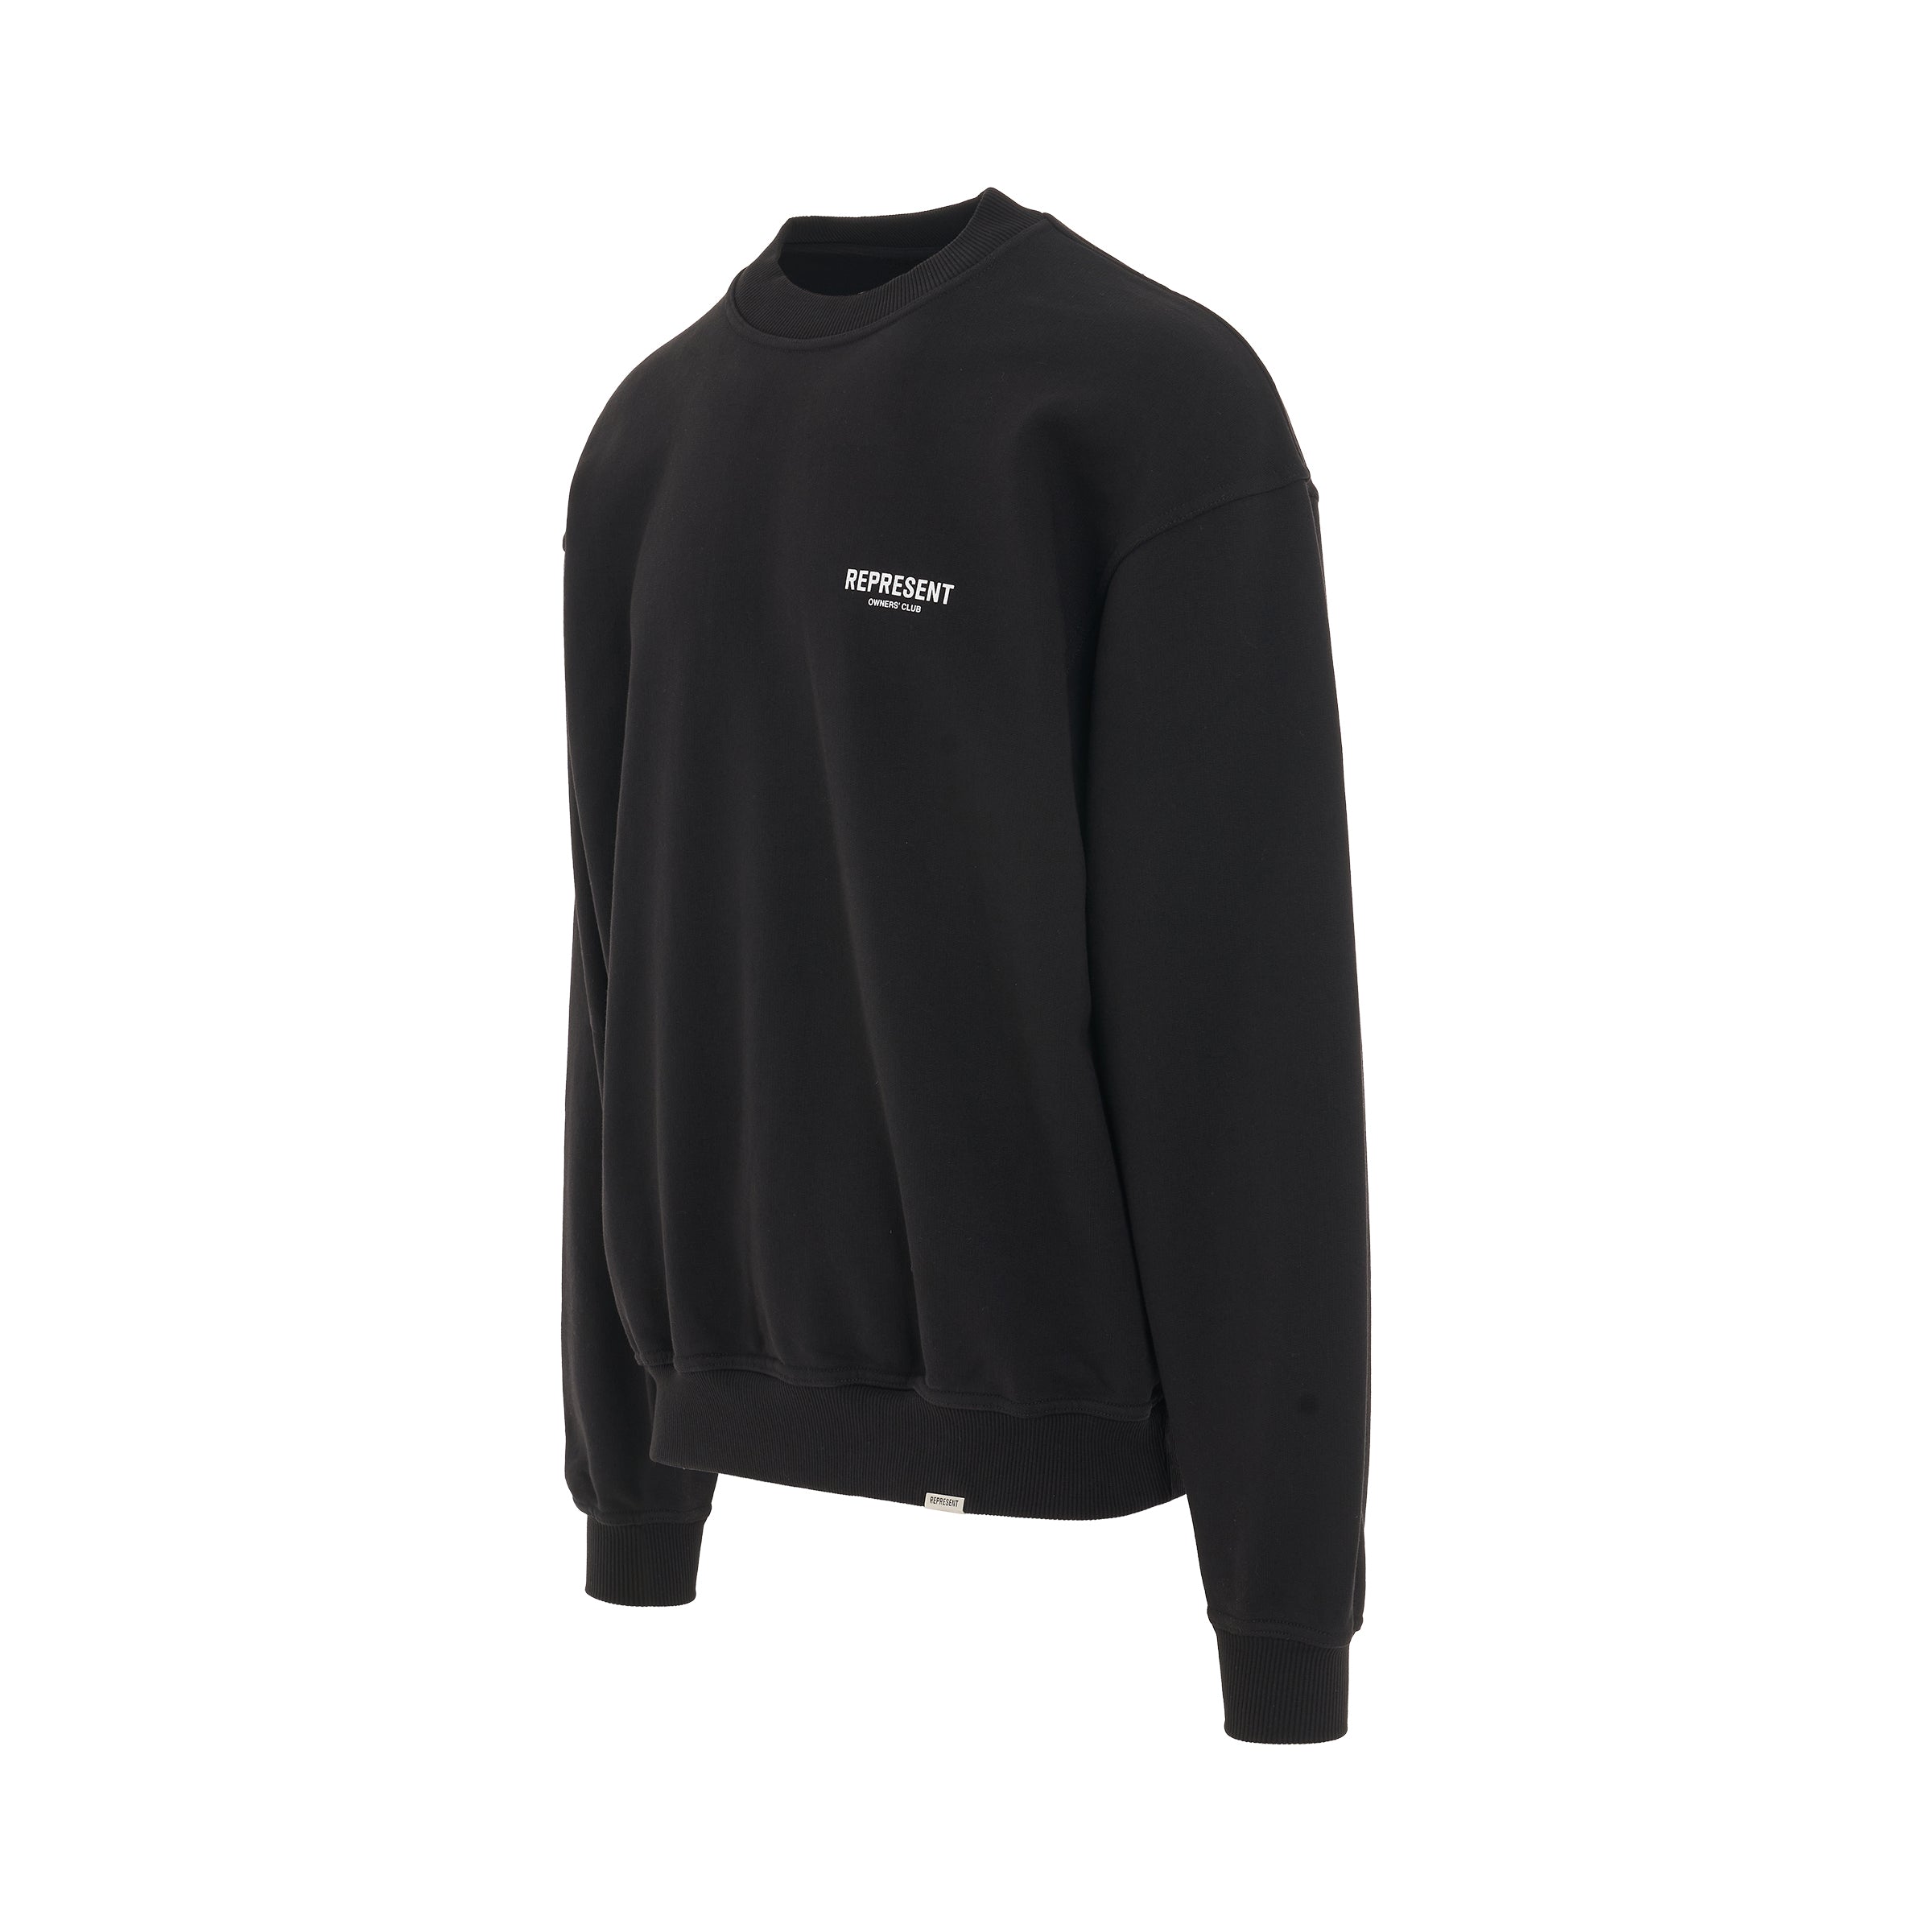 represent represent owners club sweater in black sold out sold out sale ...